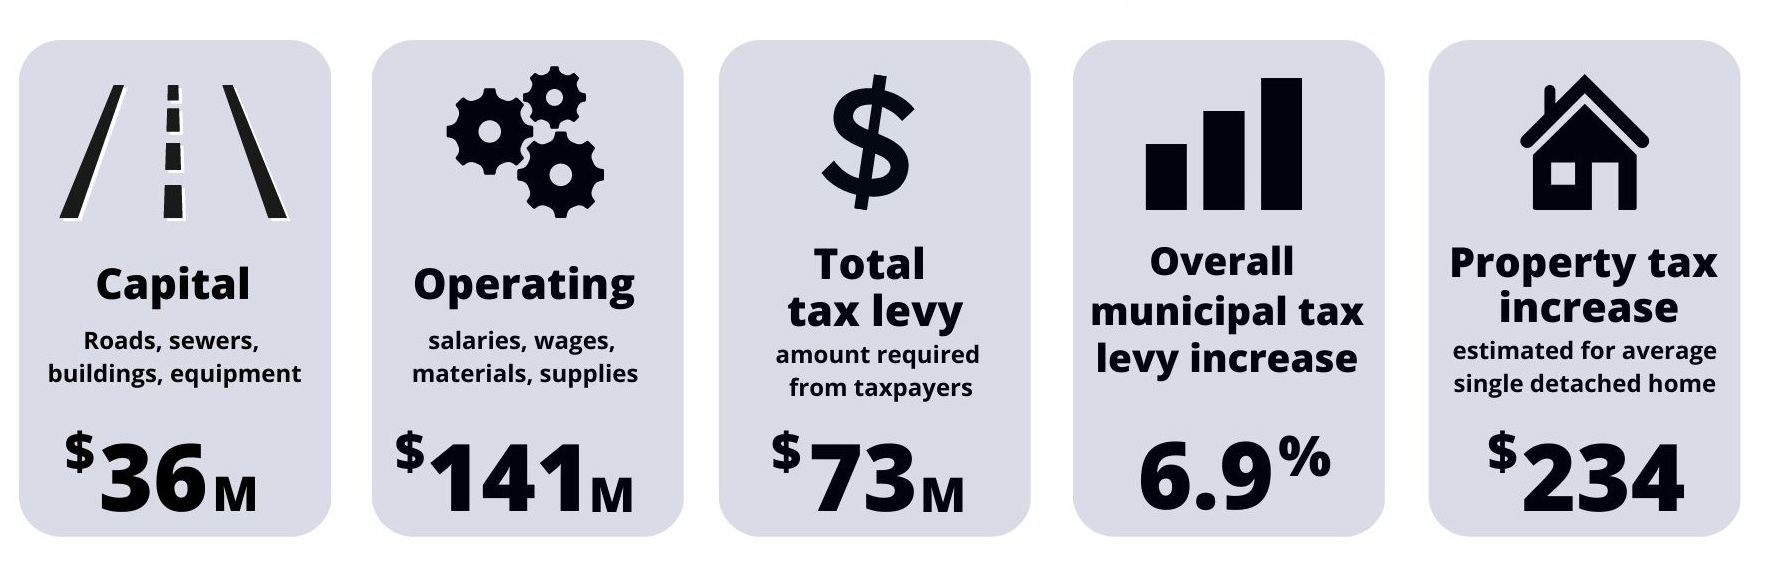 Budget infographic with totals for capital, operating, tax levy, levy increase and tax increase 